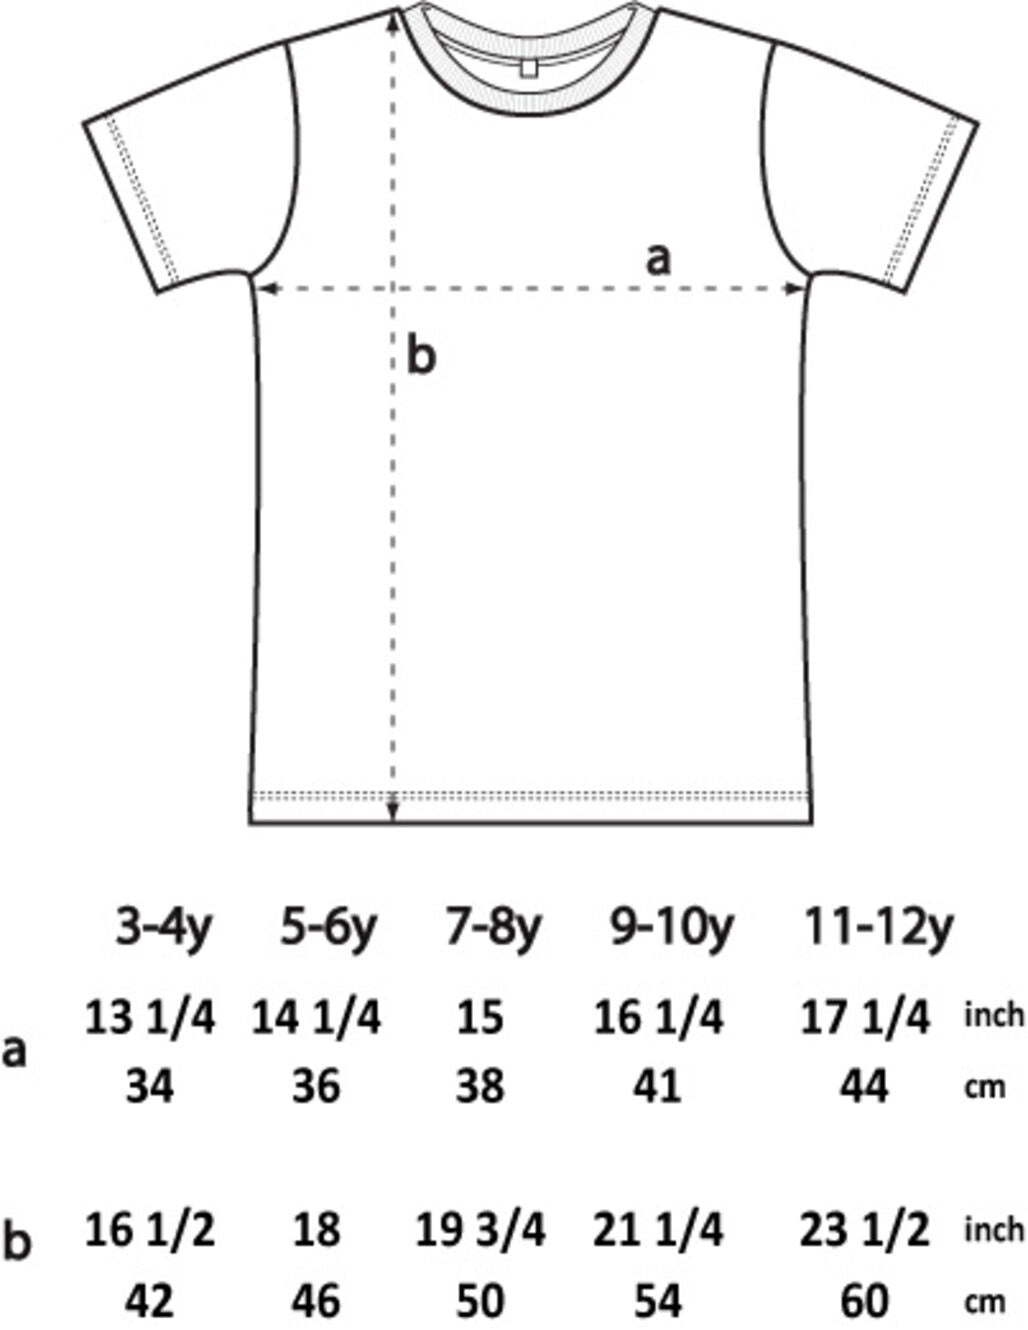 Size chart of the t-shirt. Available sizes from 3 to 12 years